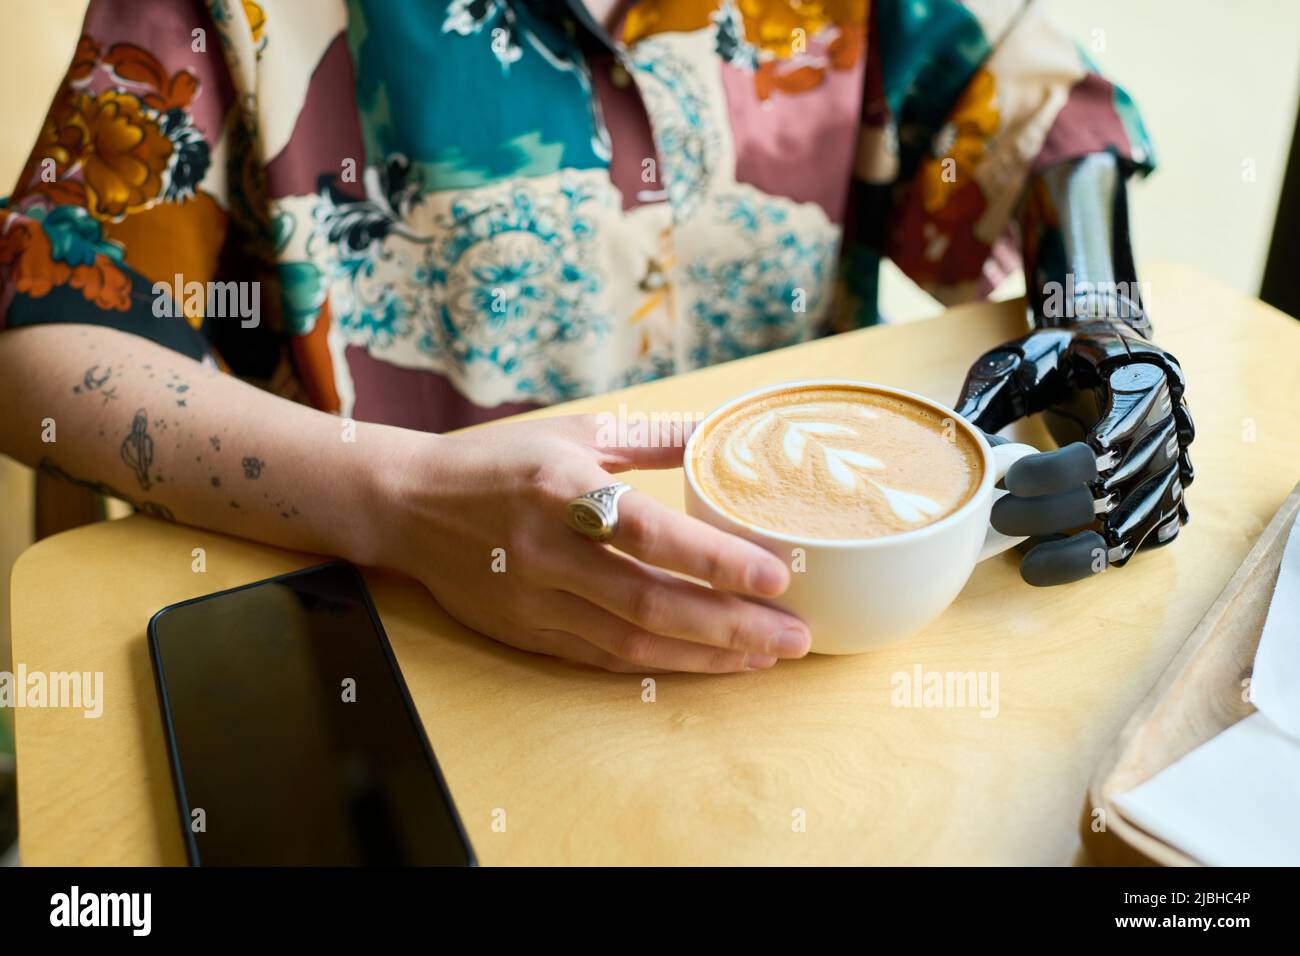 Hands of young woman with partial arm holding cup of cappuccino with fluffy milk foam and creative spiral heart shaped decor Stock Photo